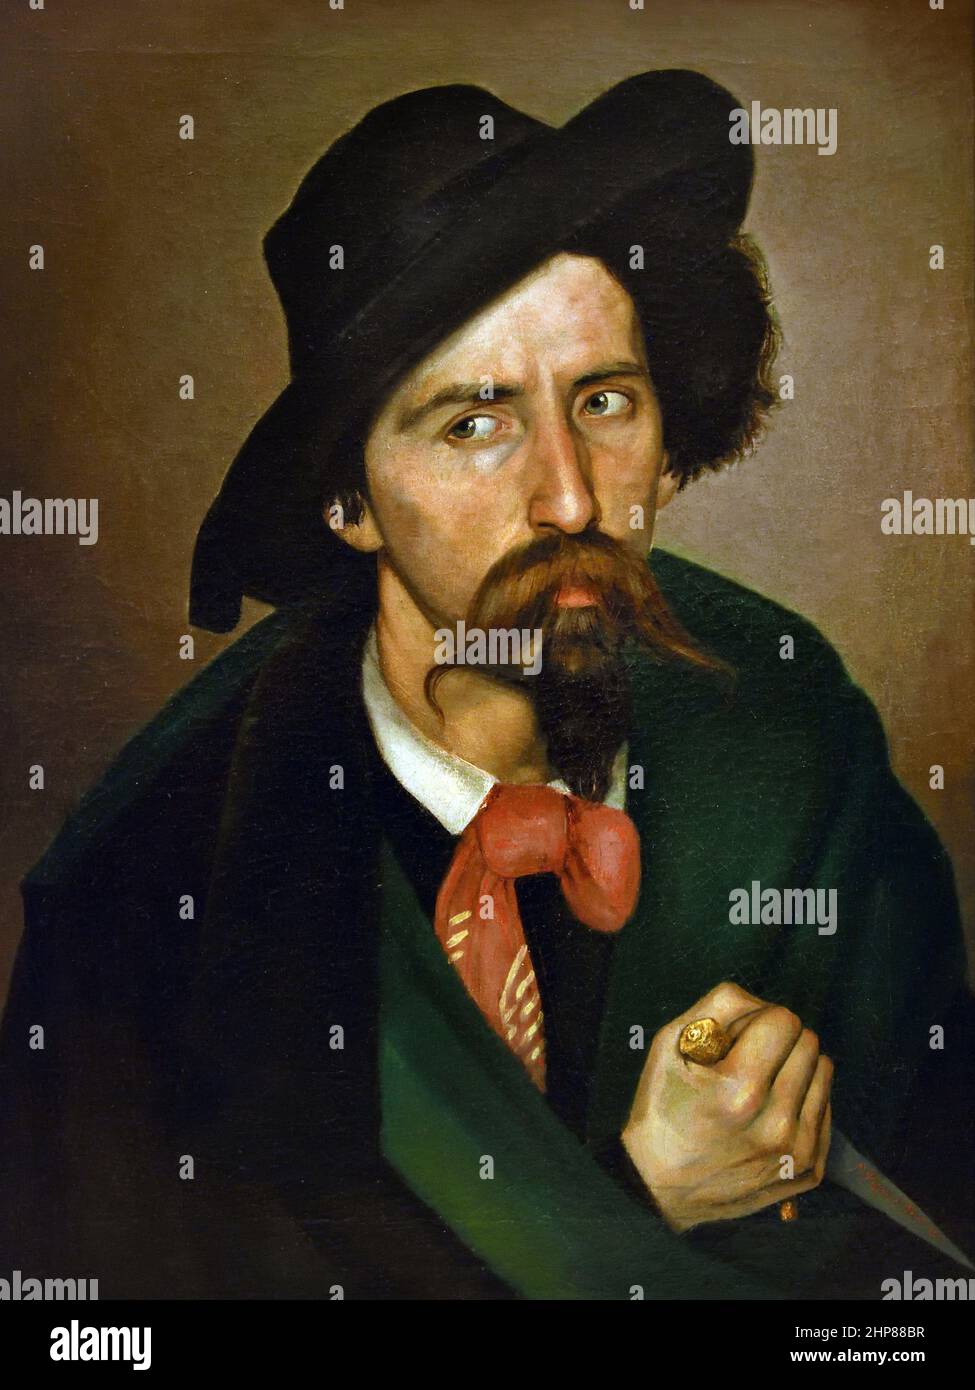 Ideal type of the romantic conspirator by painter L. Pasini second half of the 19th century Mazzini , Garibaldi  ( Unification and the creation of the Kingdom of Italy.) Stock Photo